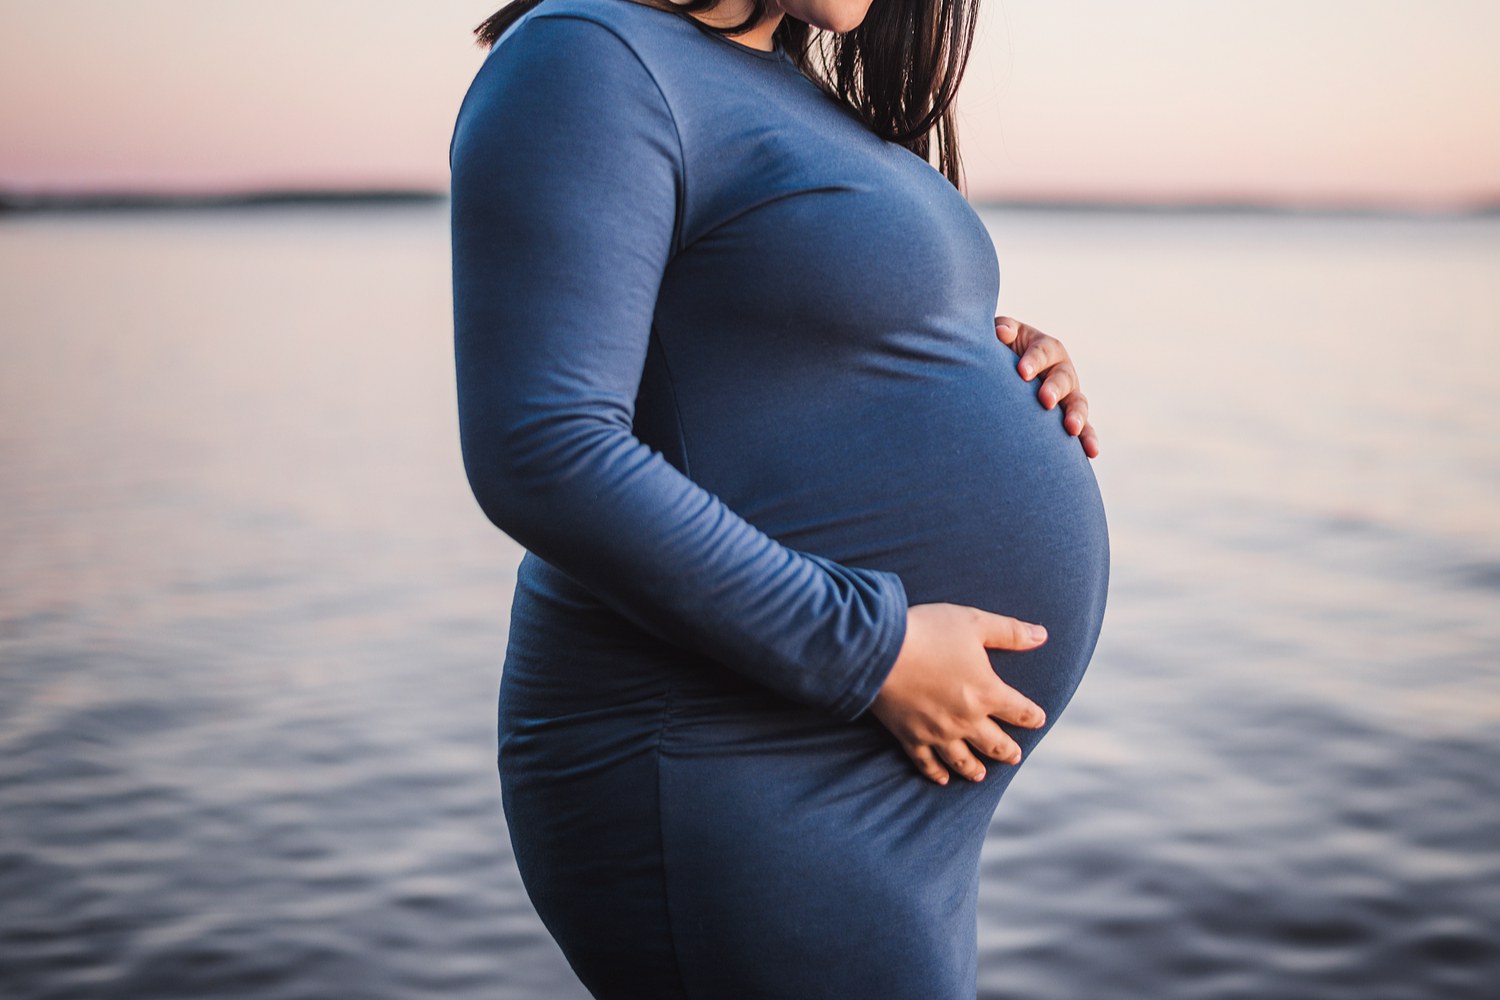 Benefits of diving during pregnancy